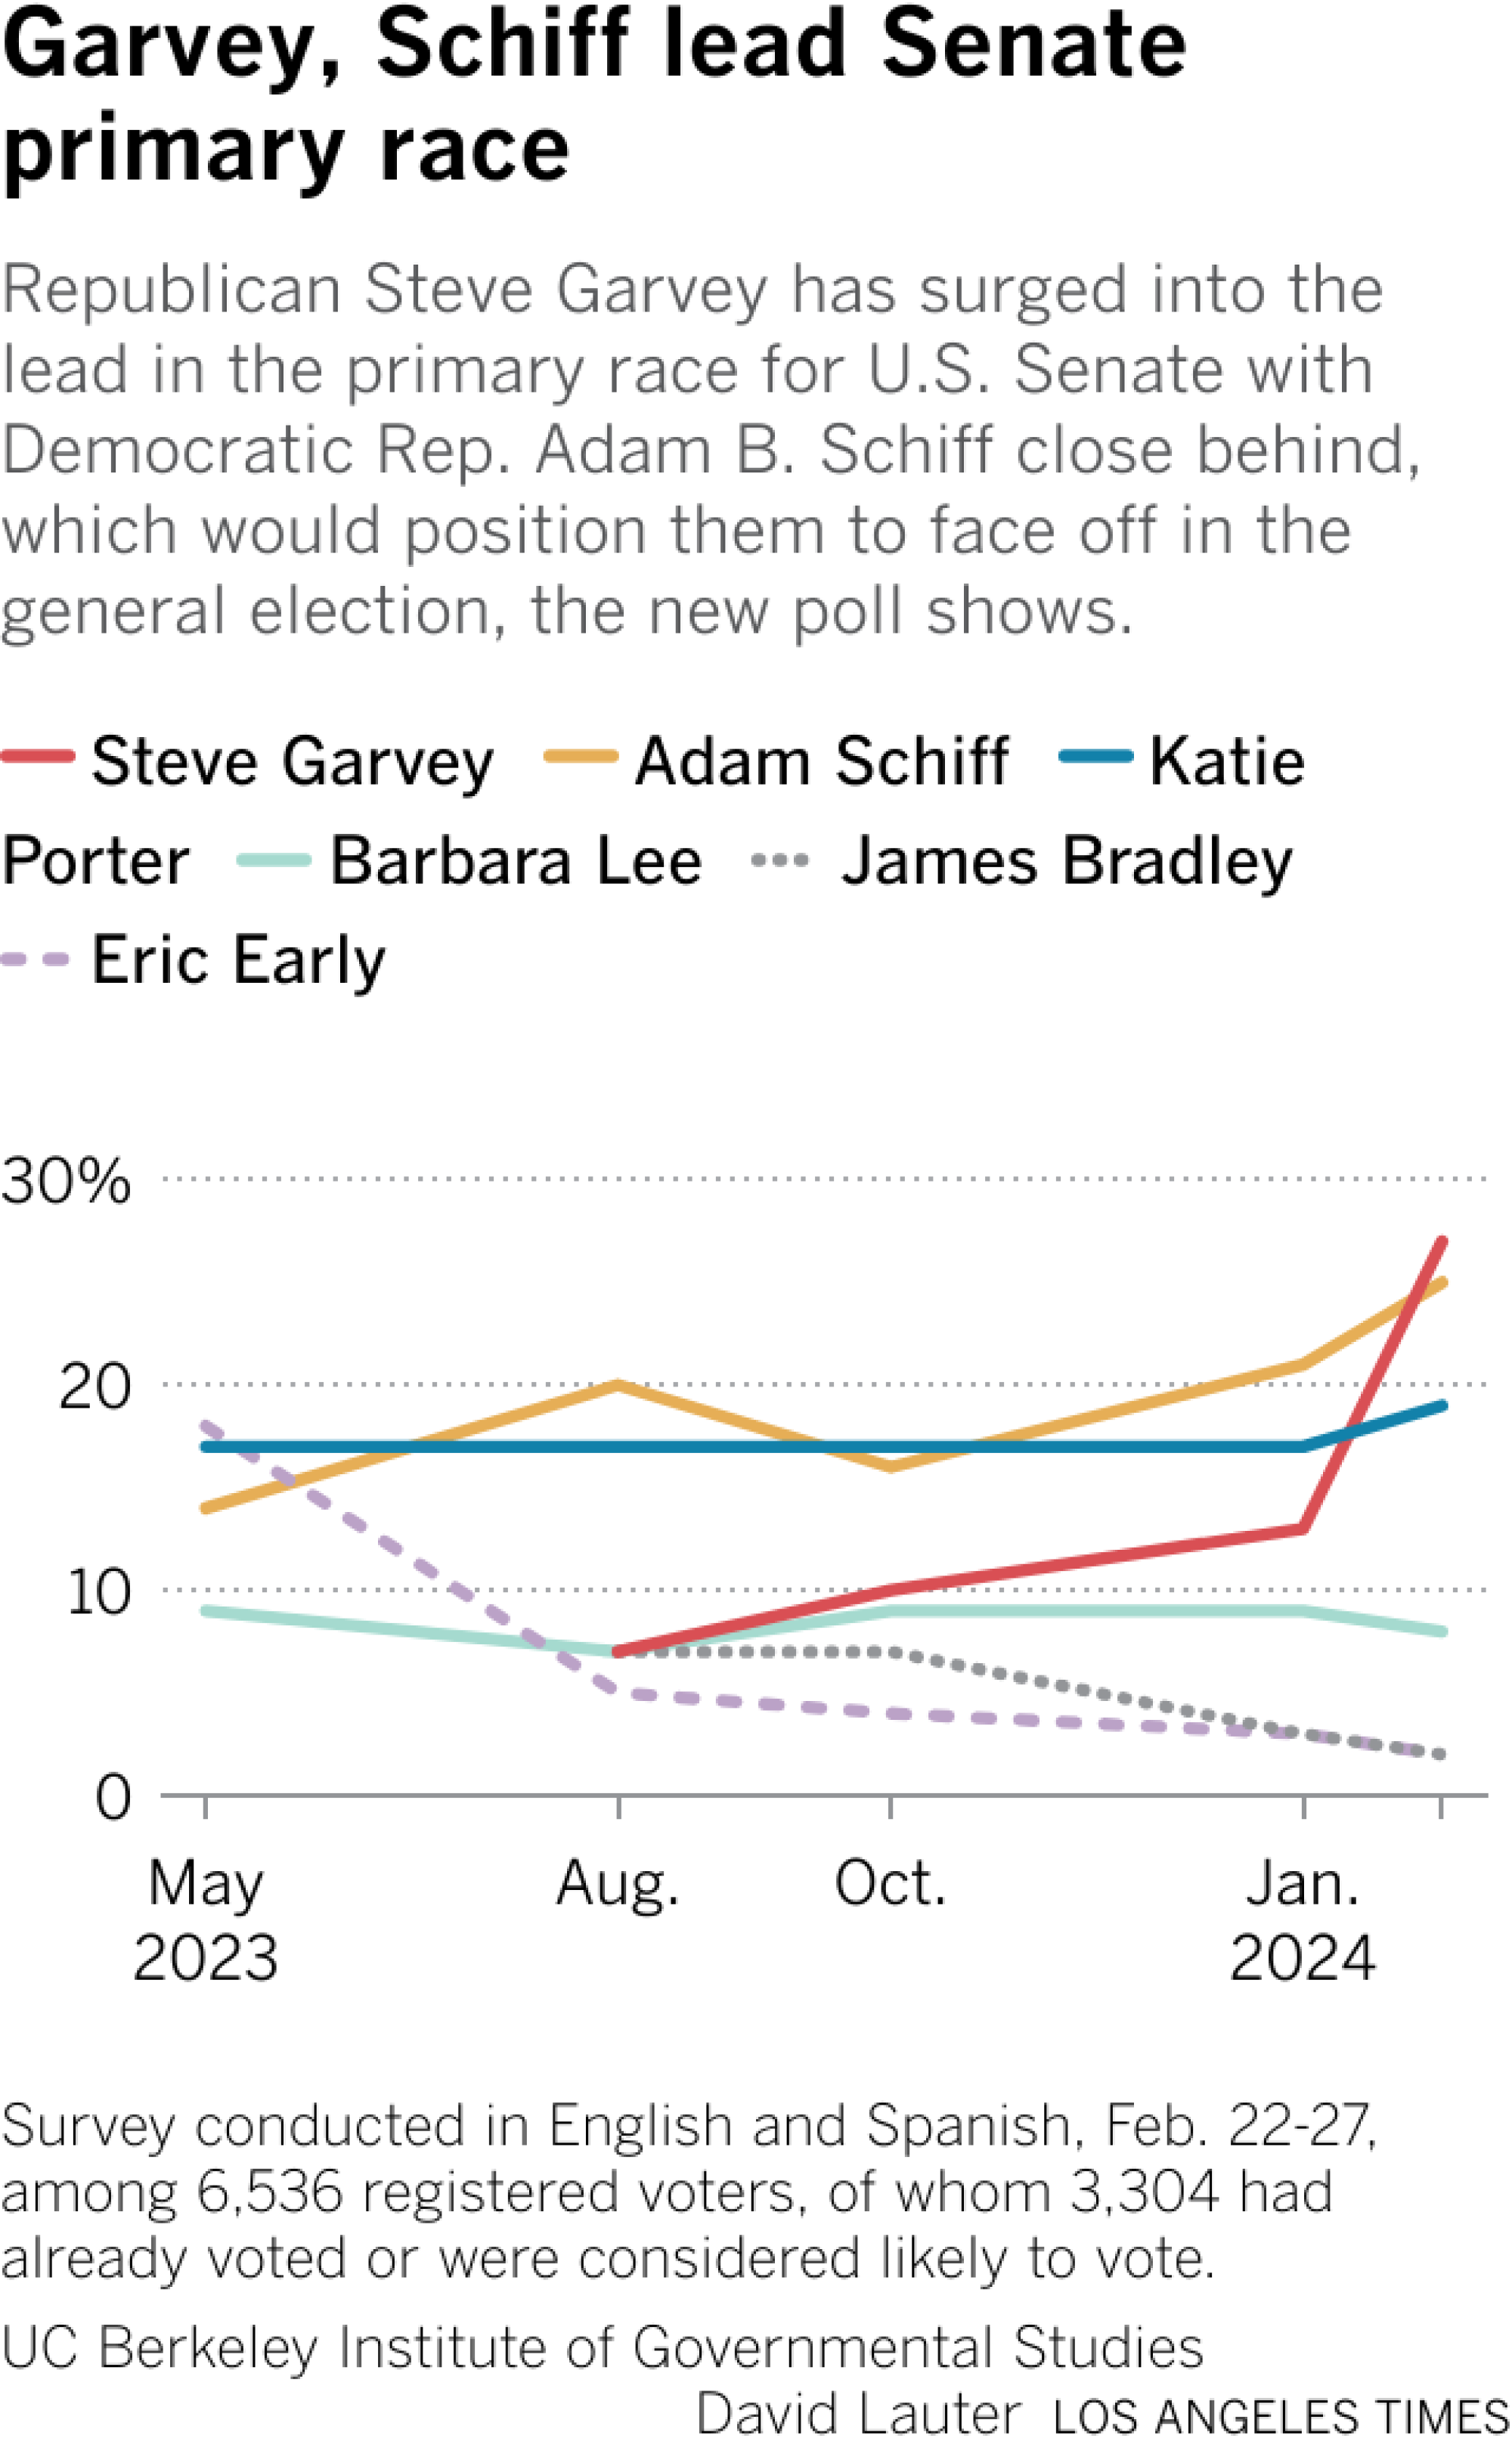 Chart shows support for Schiff and Garvey rising sharply while support for two other Republican candidates declines and backing for Democratic Reps. Katie Porter and Barbara Lee remains flat.